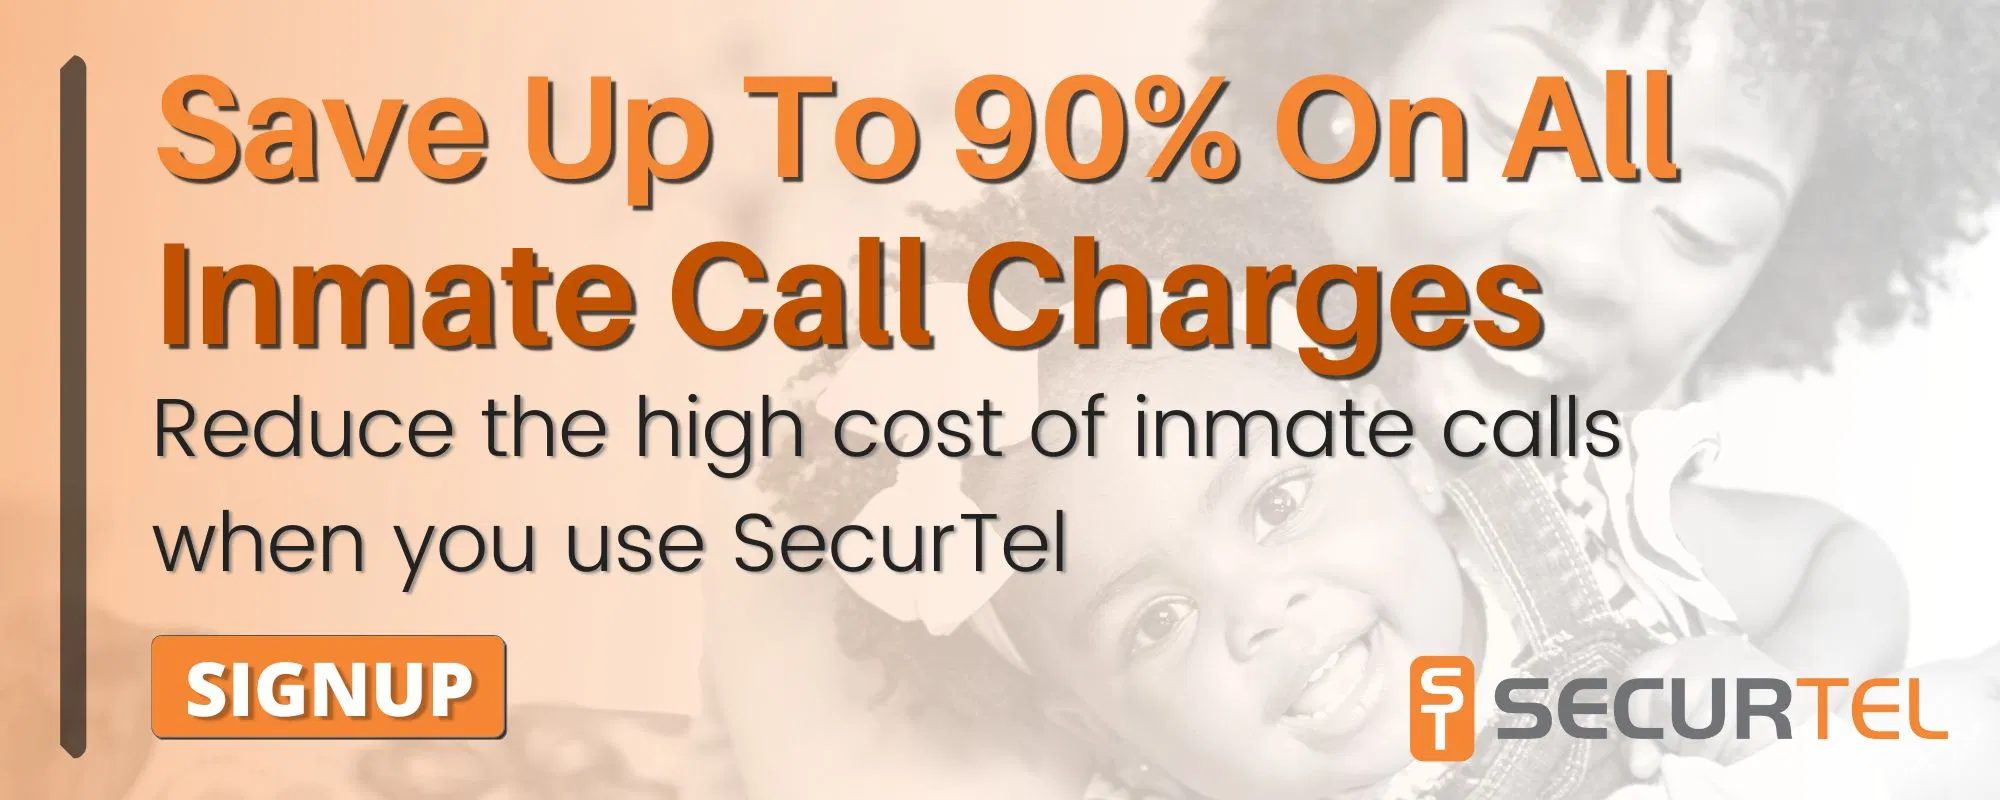 SecurTel inmate calling services